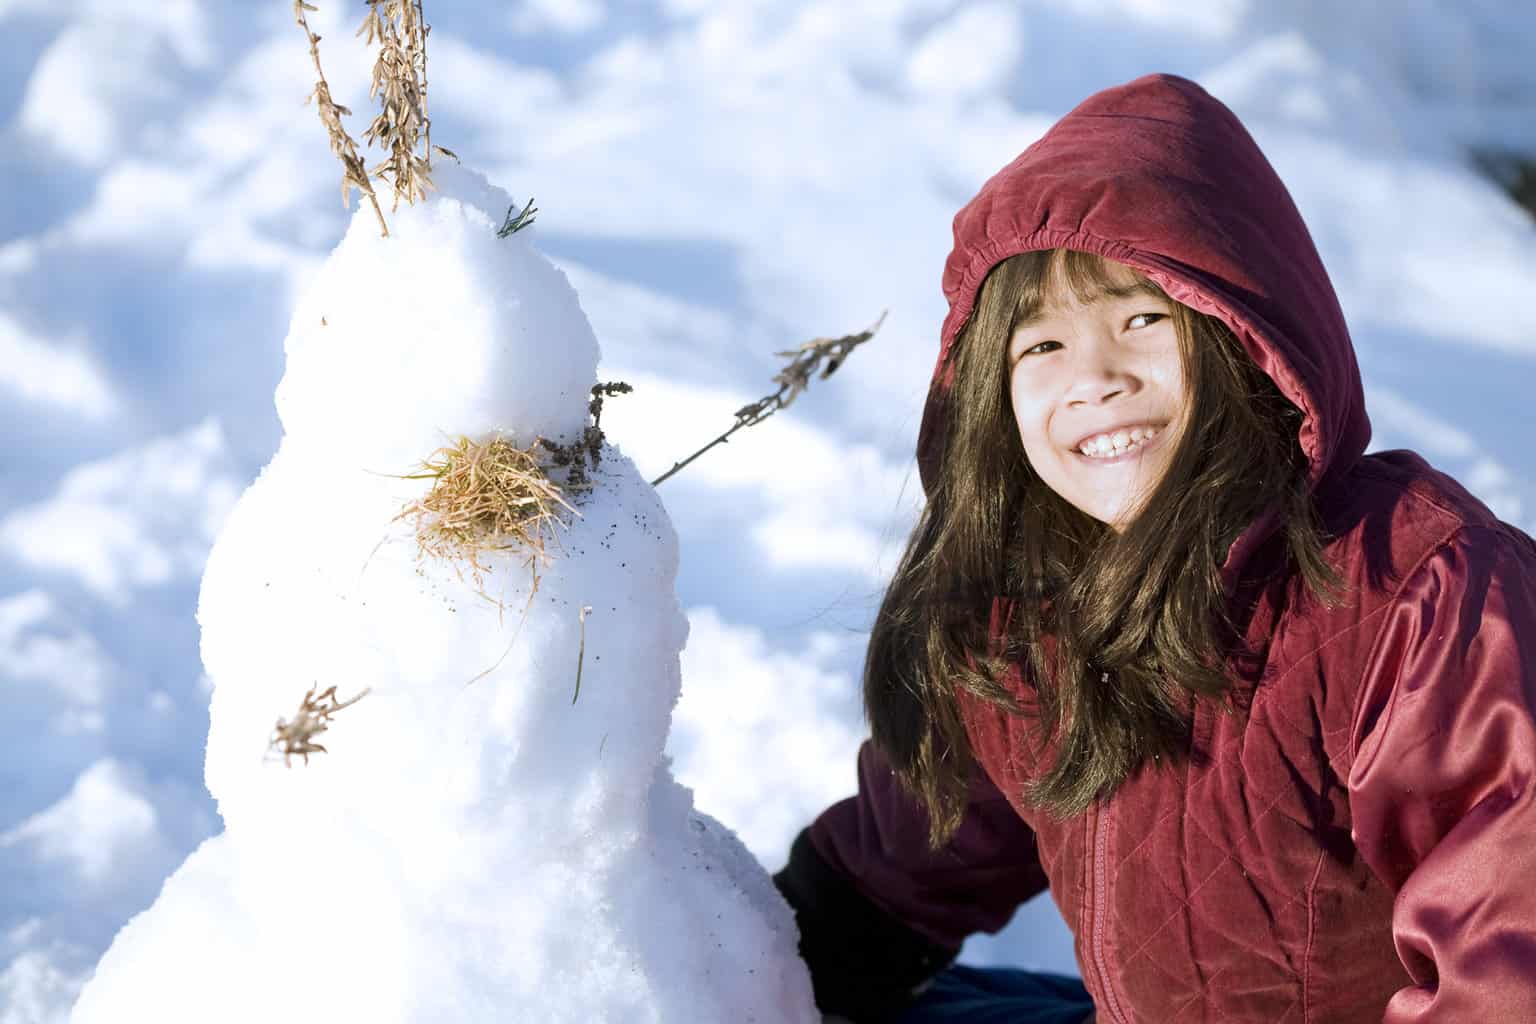 girl playing in the snow next to her little snowman, 12 days of christmas activity ideas for families